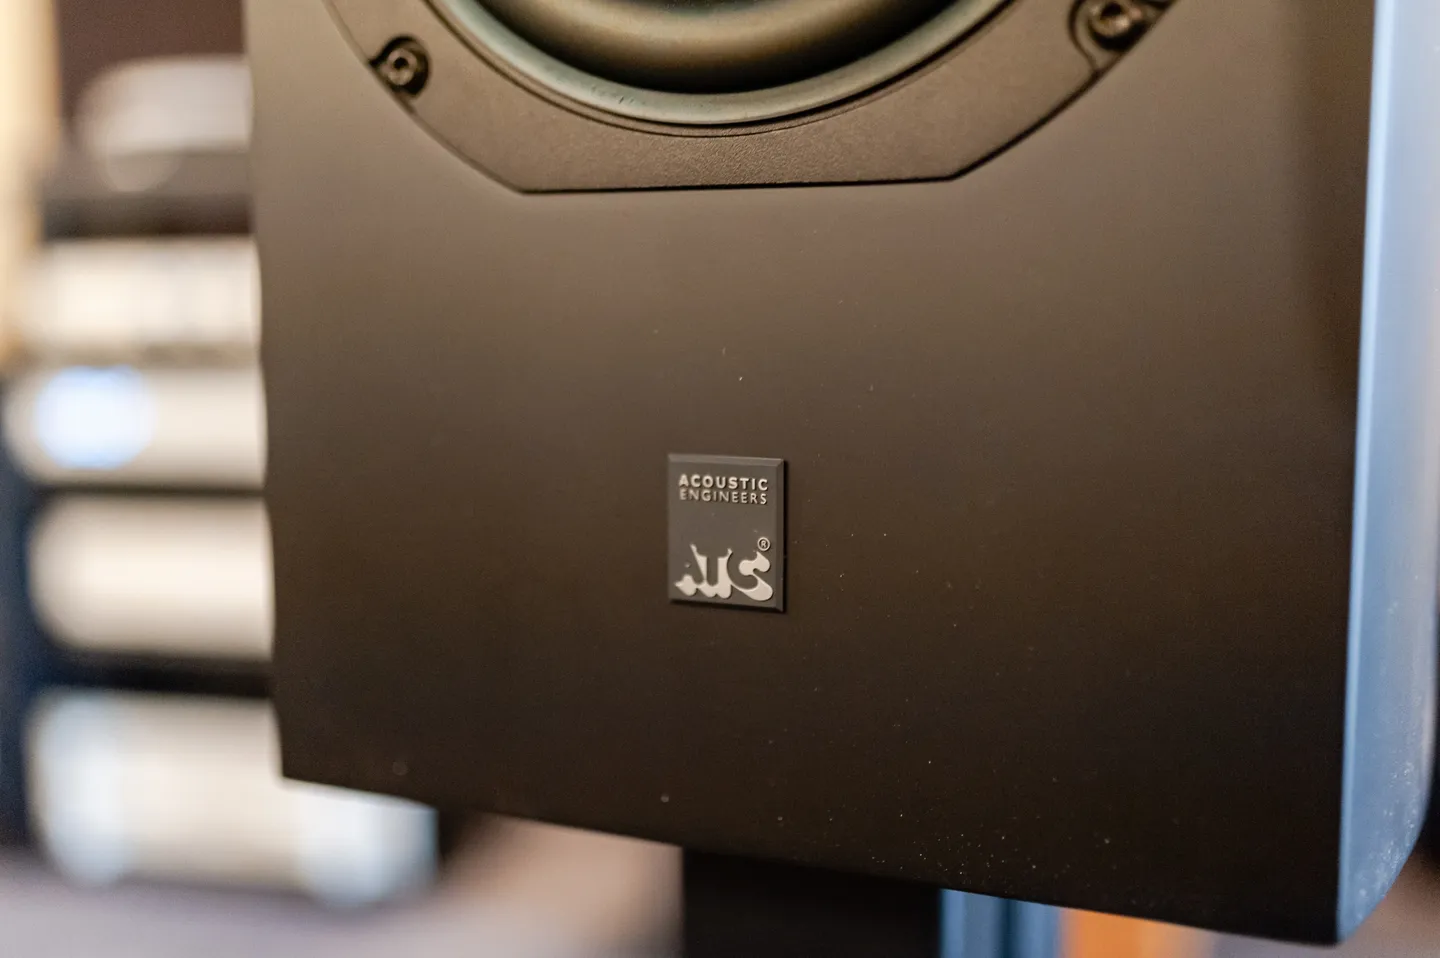 A Speaker With Acoustic Engineers Label